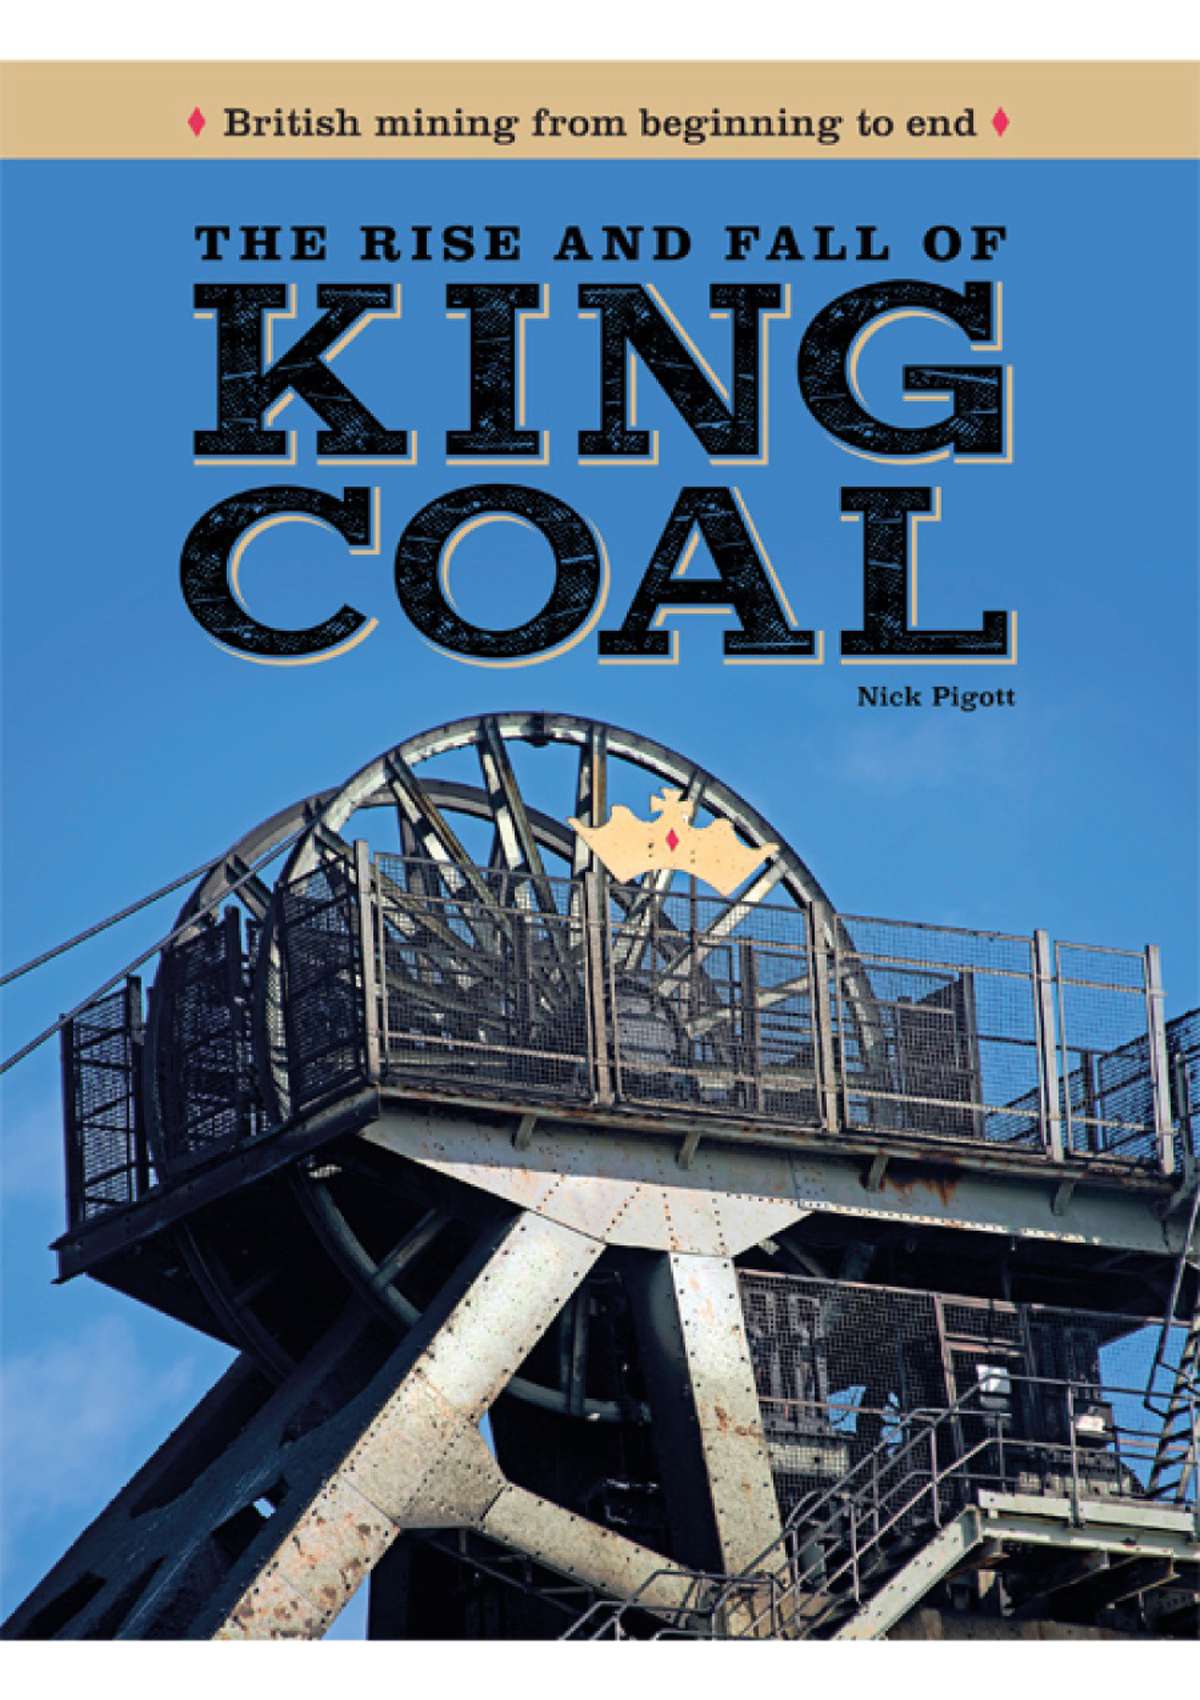 8634 - The Rise and Fall of King Coal